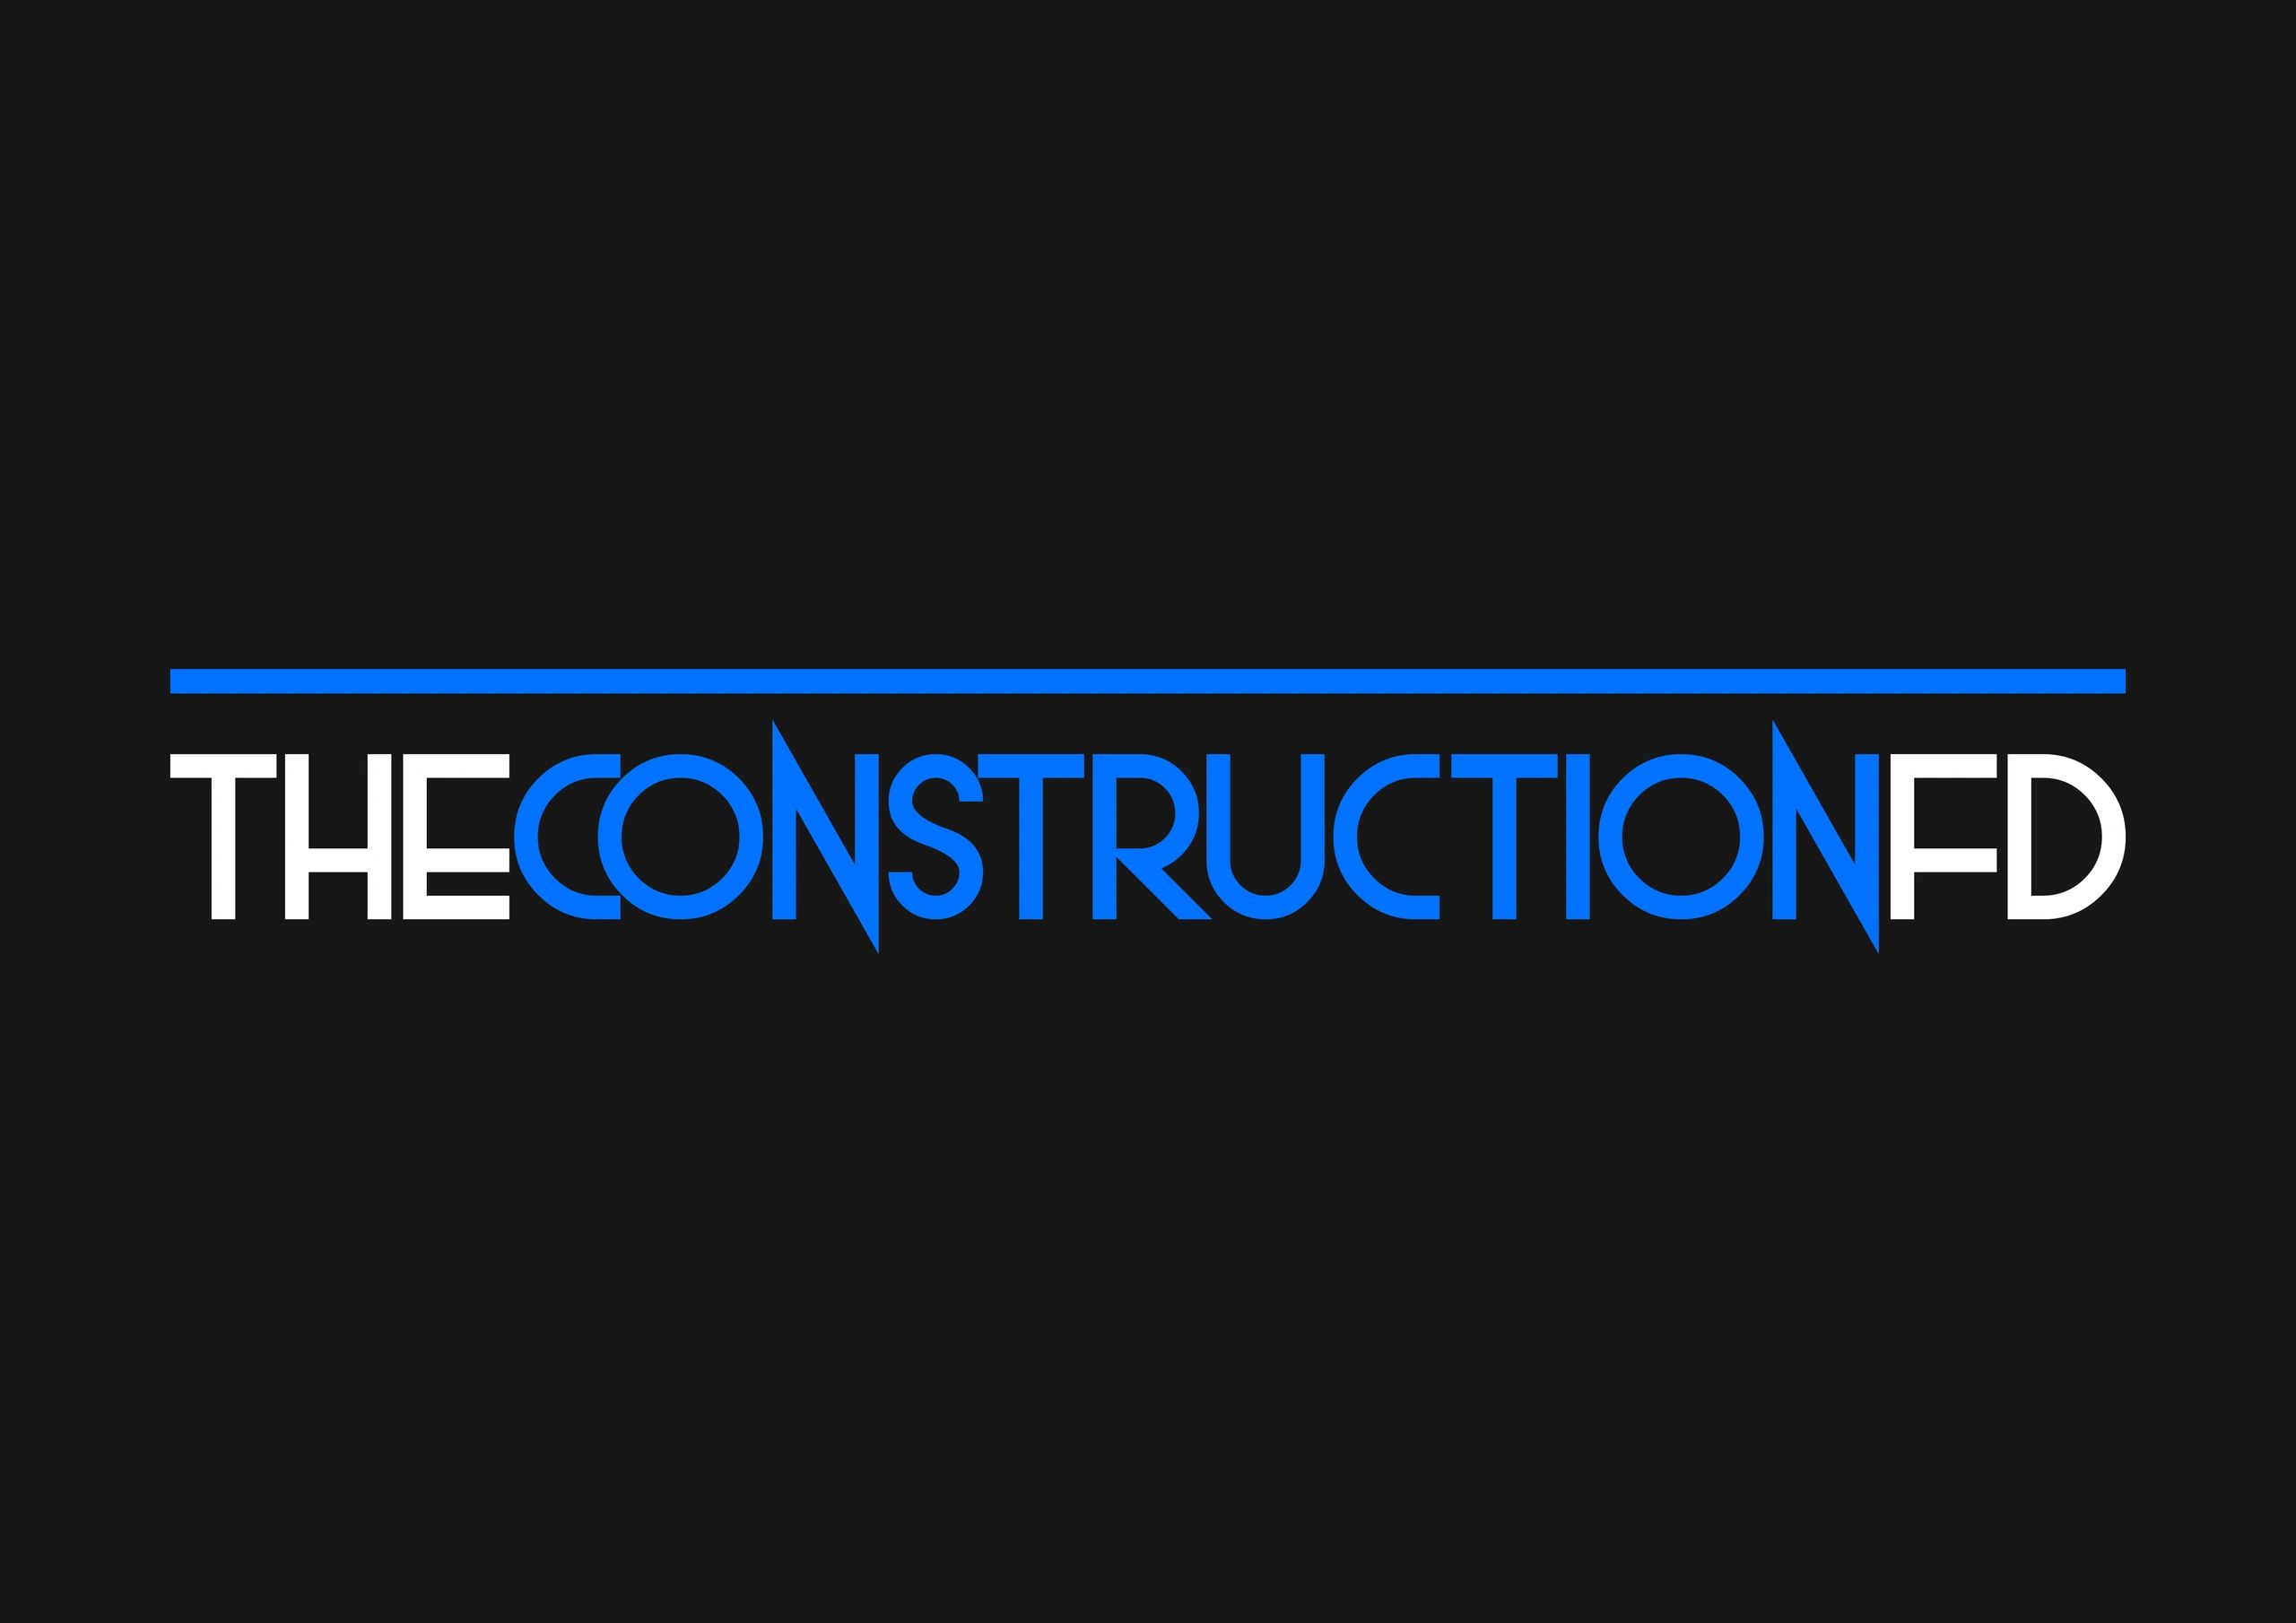 The Construction FD offering Portfolio Finance Director services